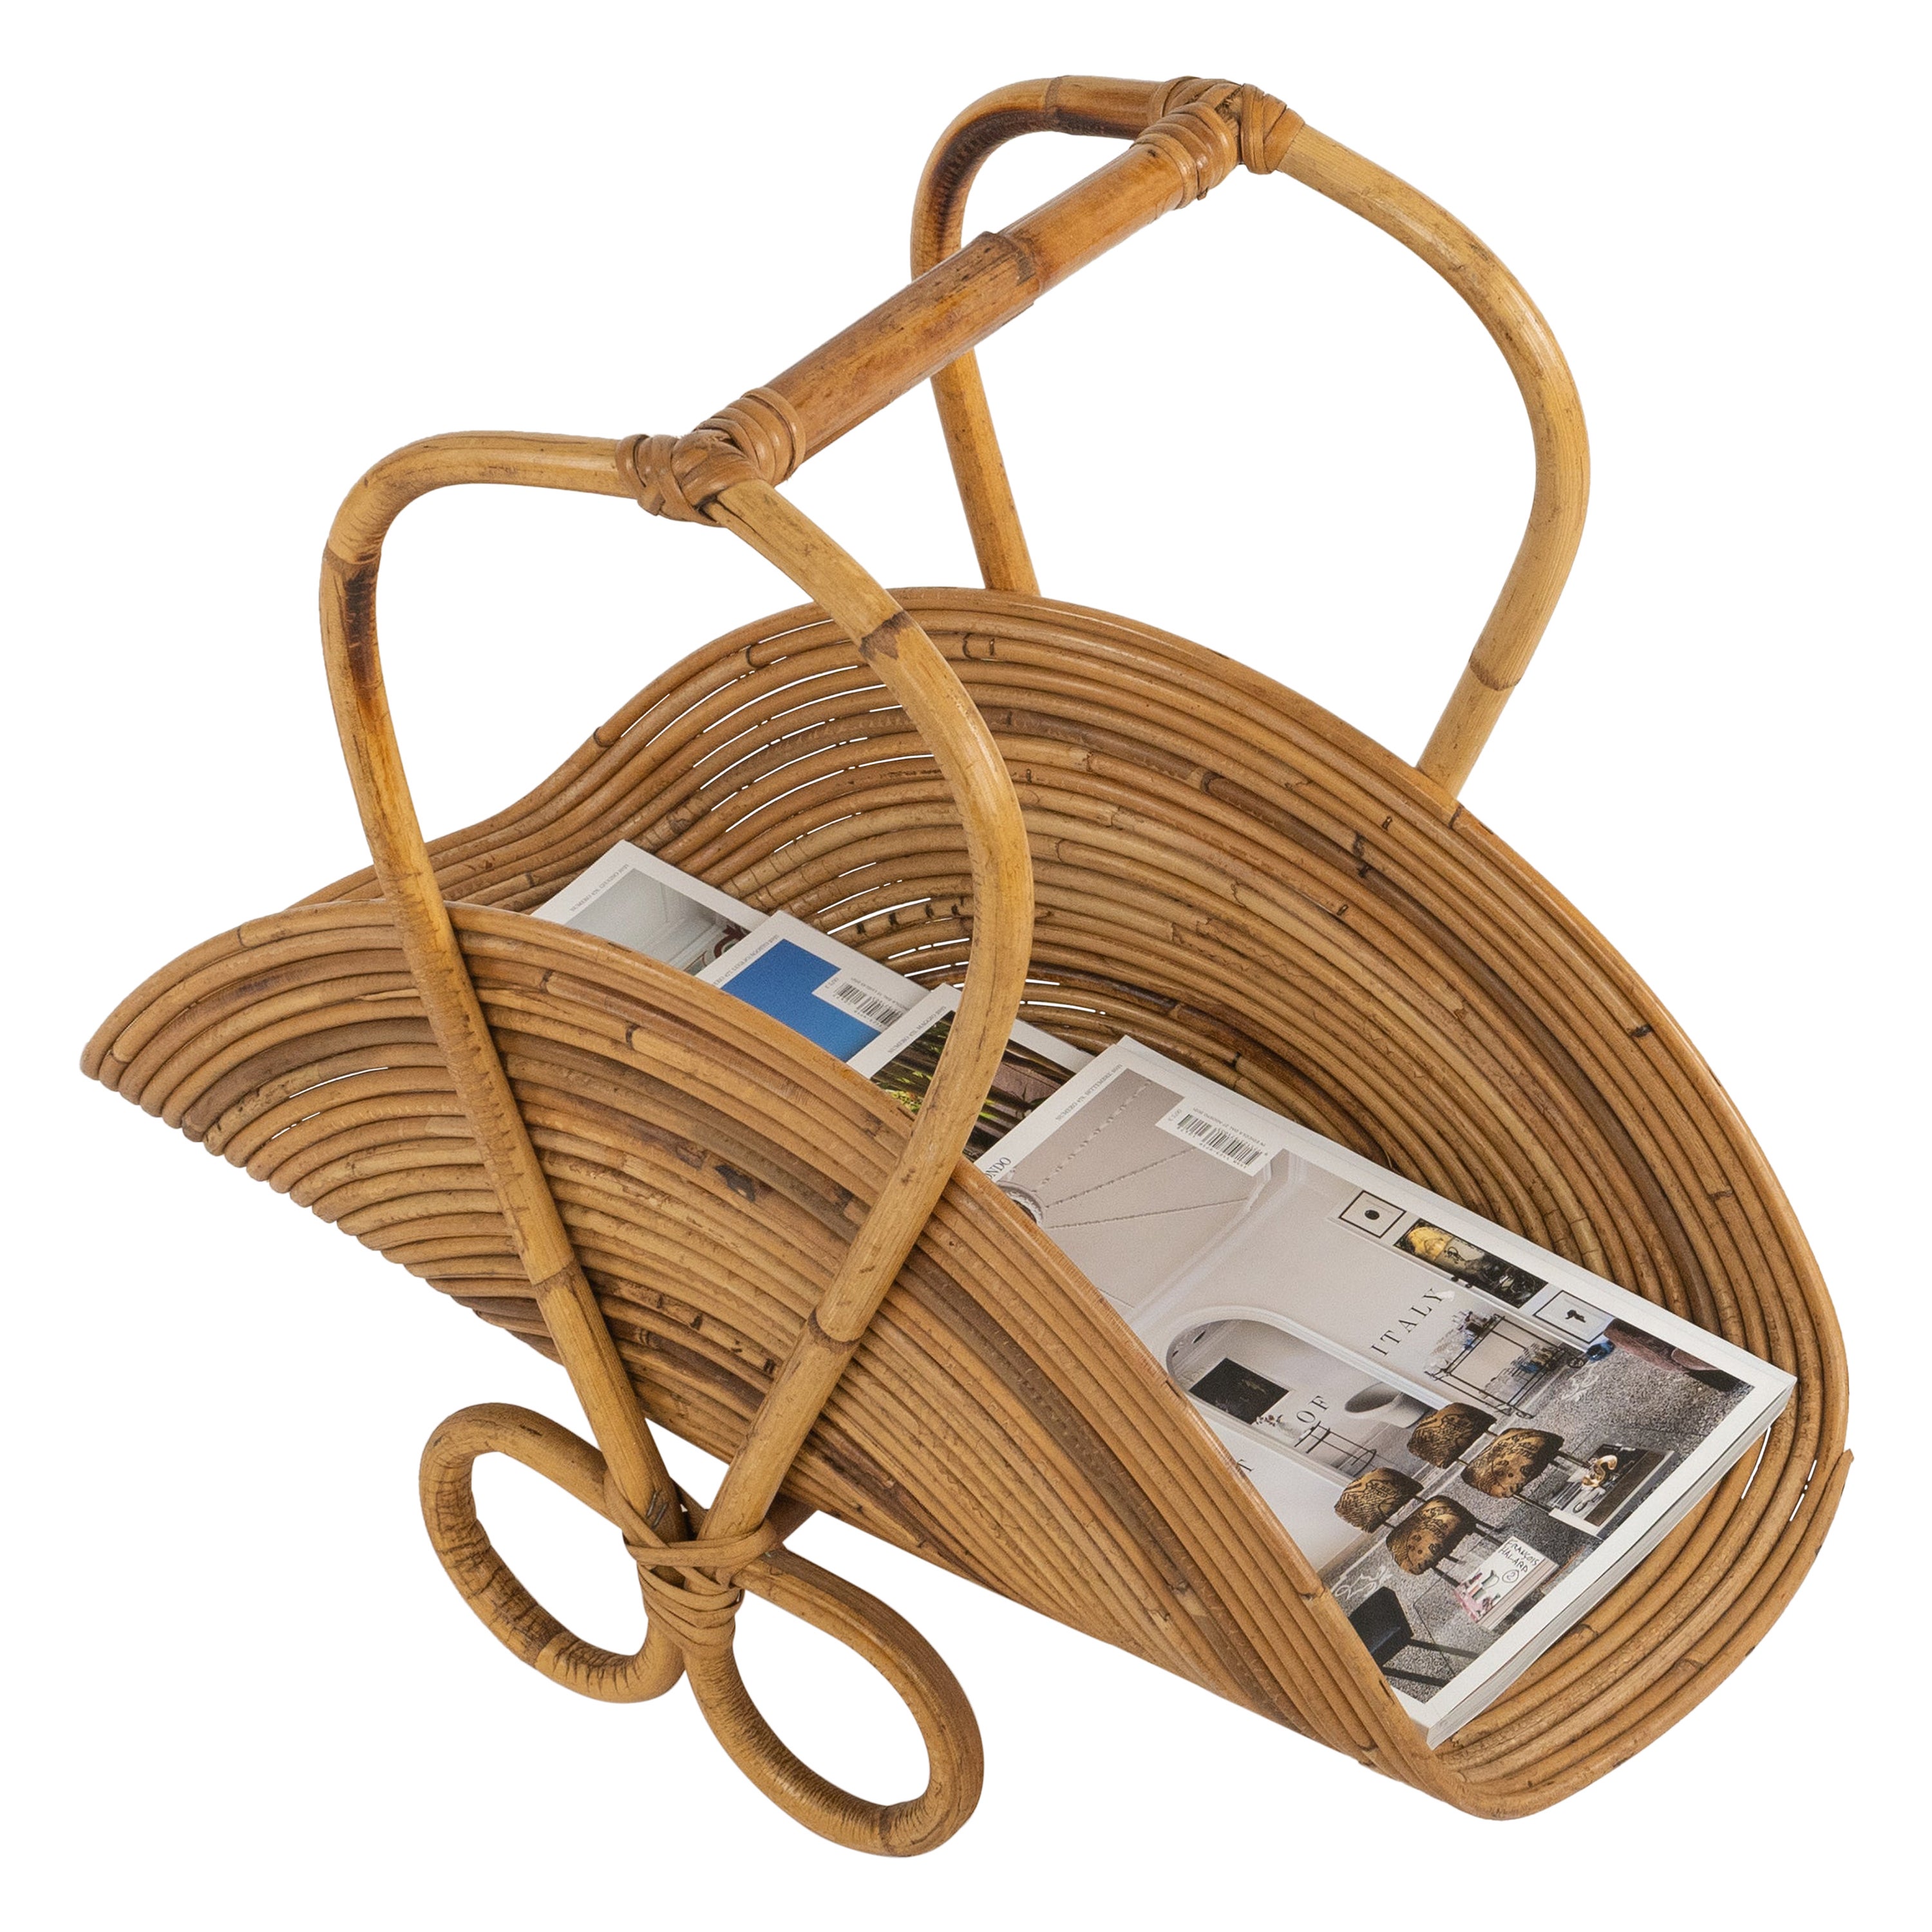 Midcentury Bamboo and Rattan Magazine Rack Vivai Del Sud Style, Italy 1960s For Sale